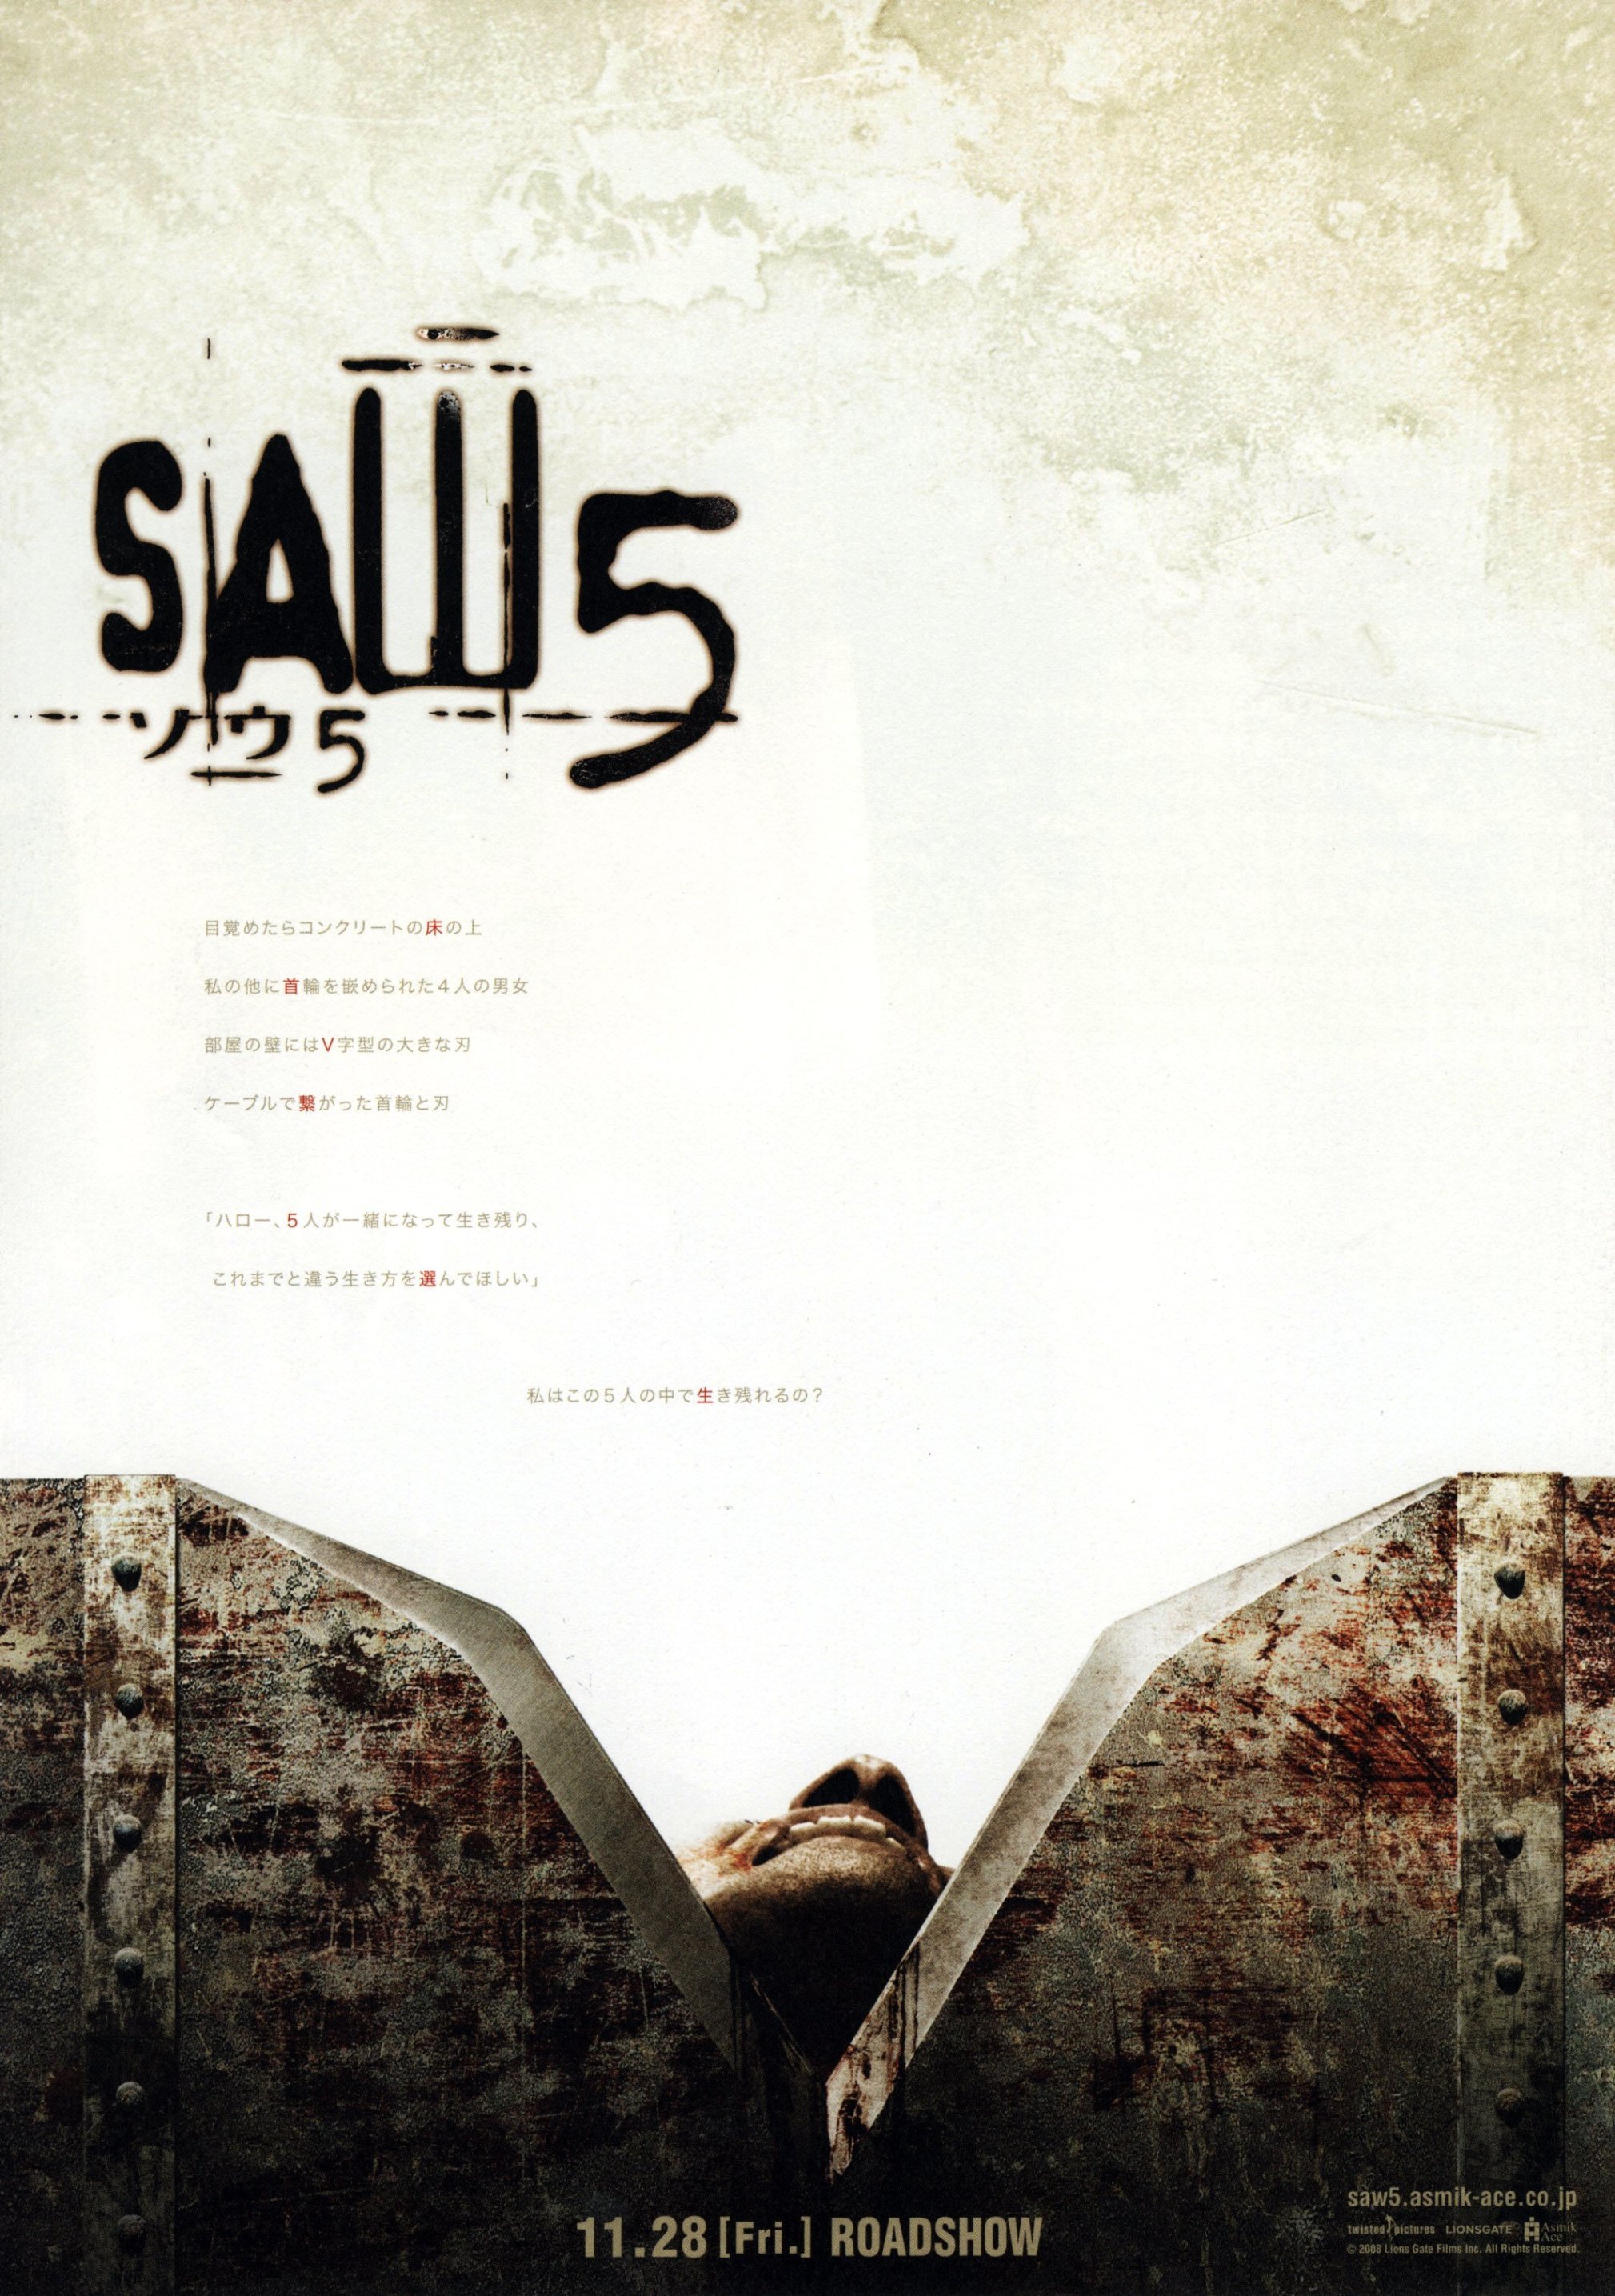 Saw V Backgrounds, Compatible - PC, Mobile, Gadgets| 2019x2870 px